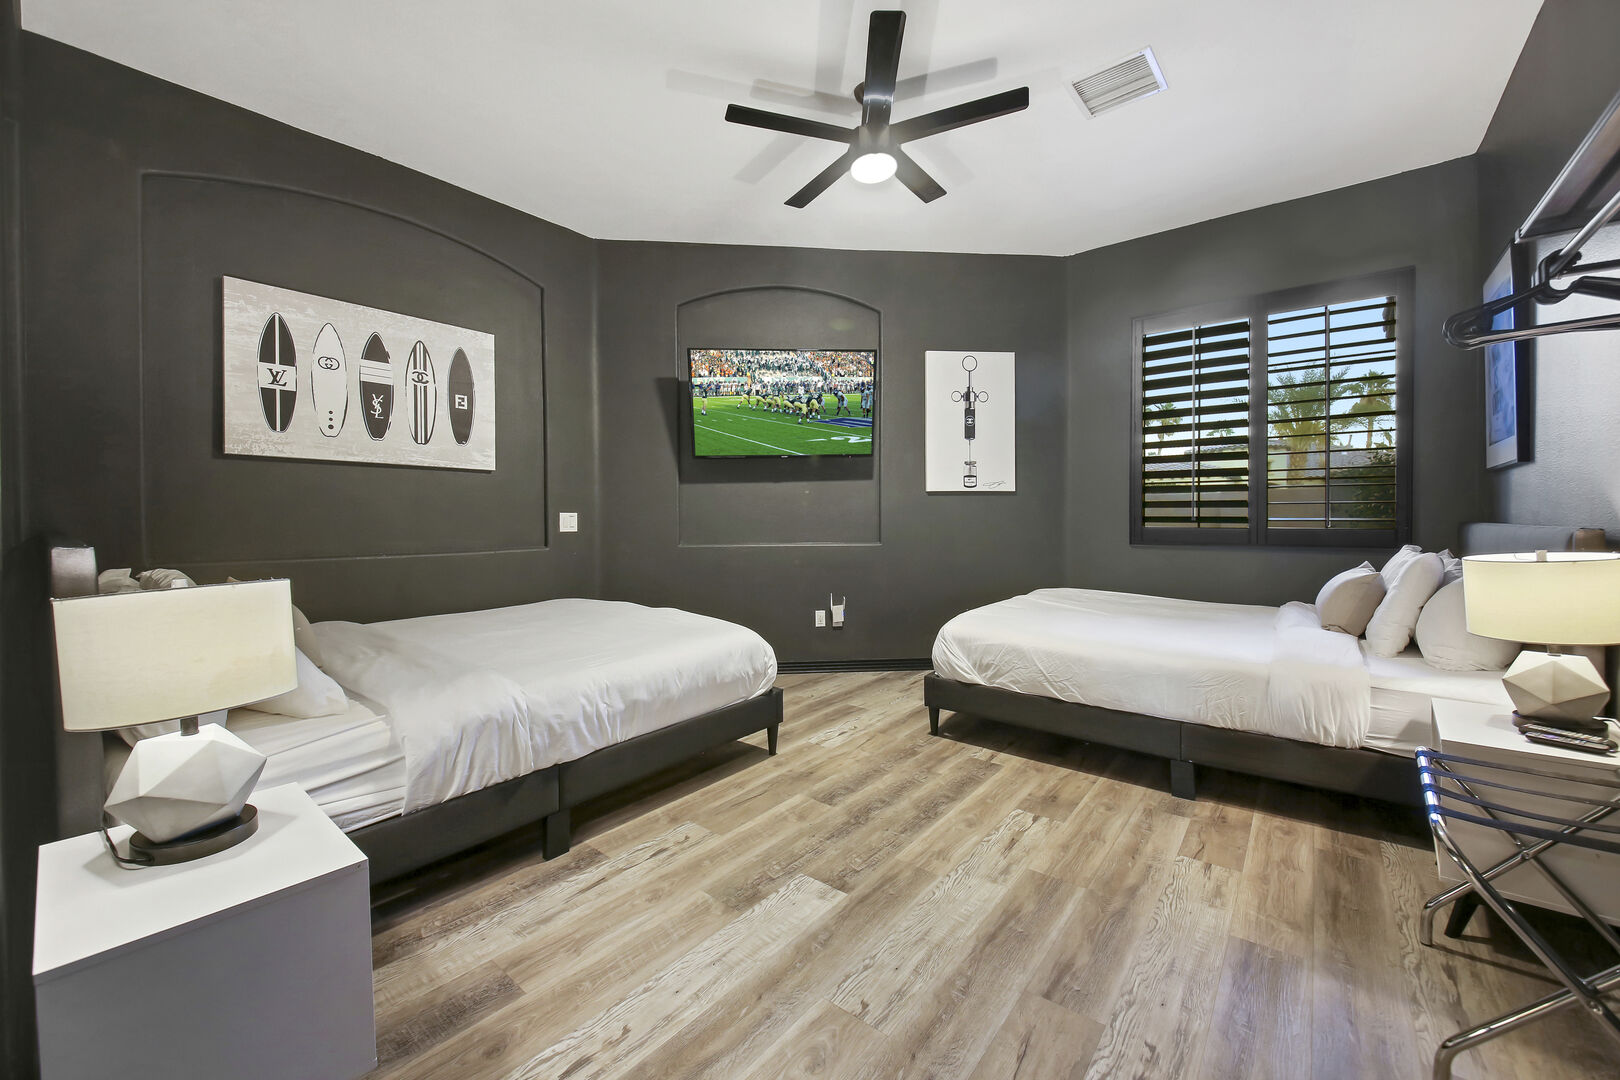 Bedroom 4 has 2 King-size beds and a 55-inch HDTV.